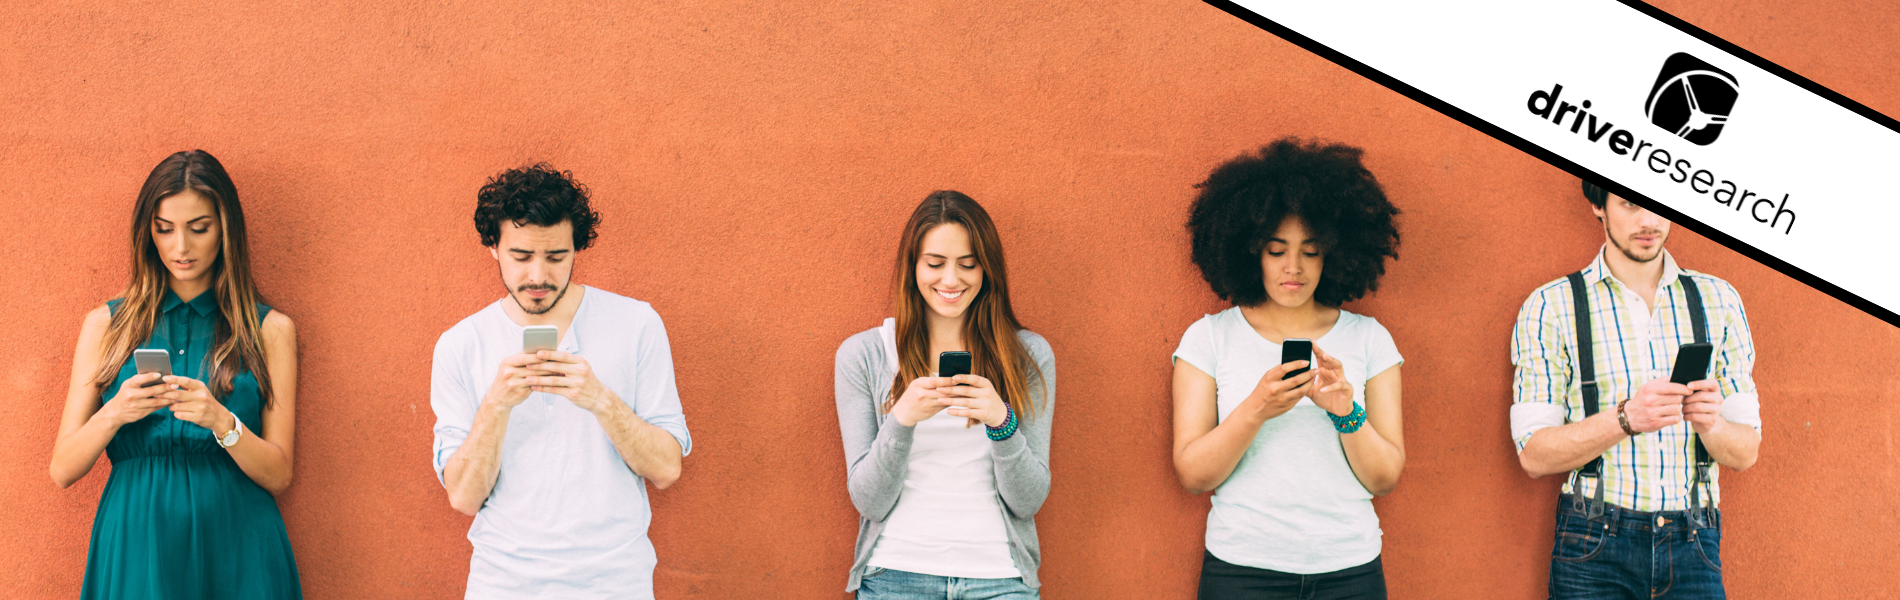 group of people texting against orange wall